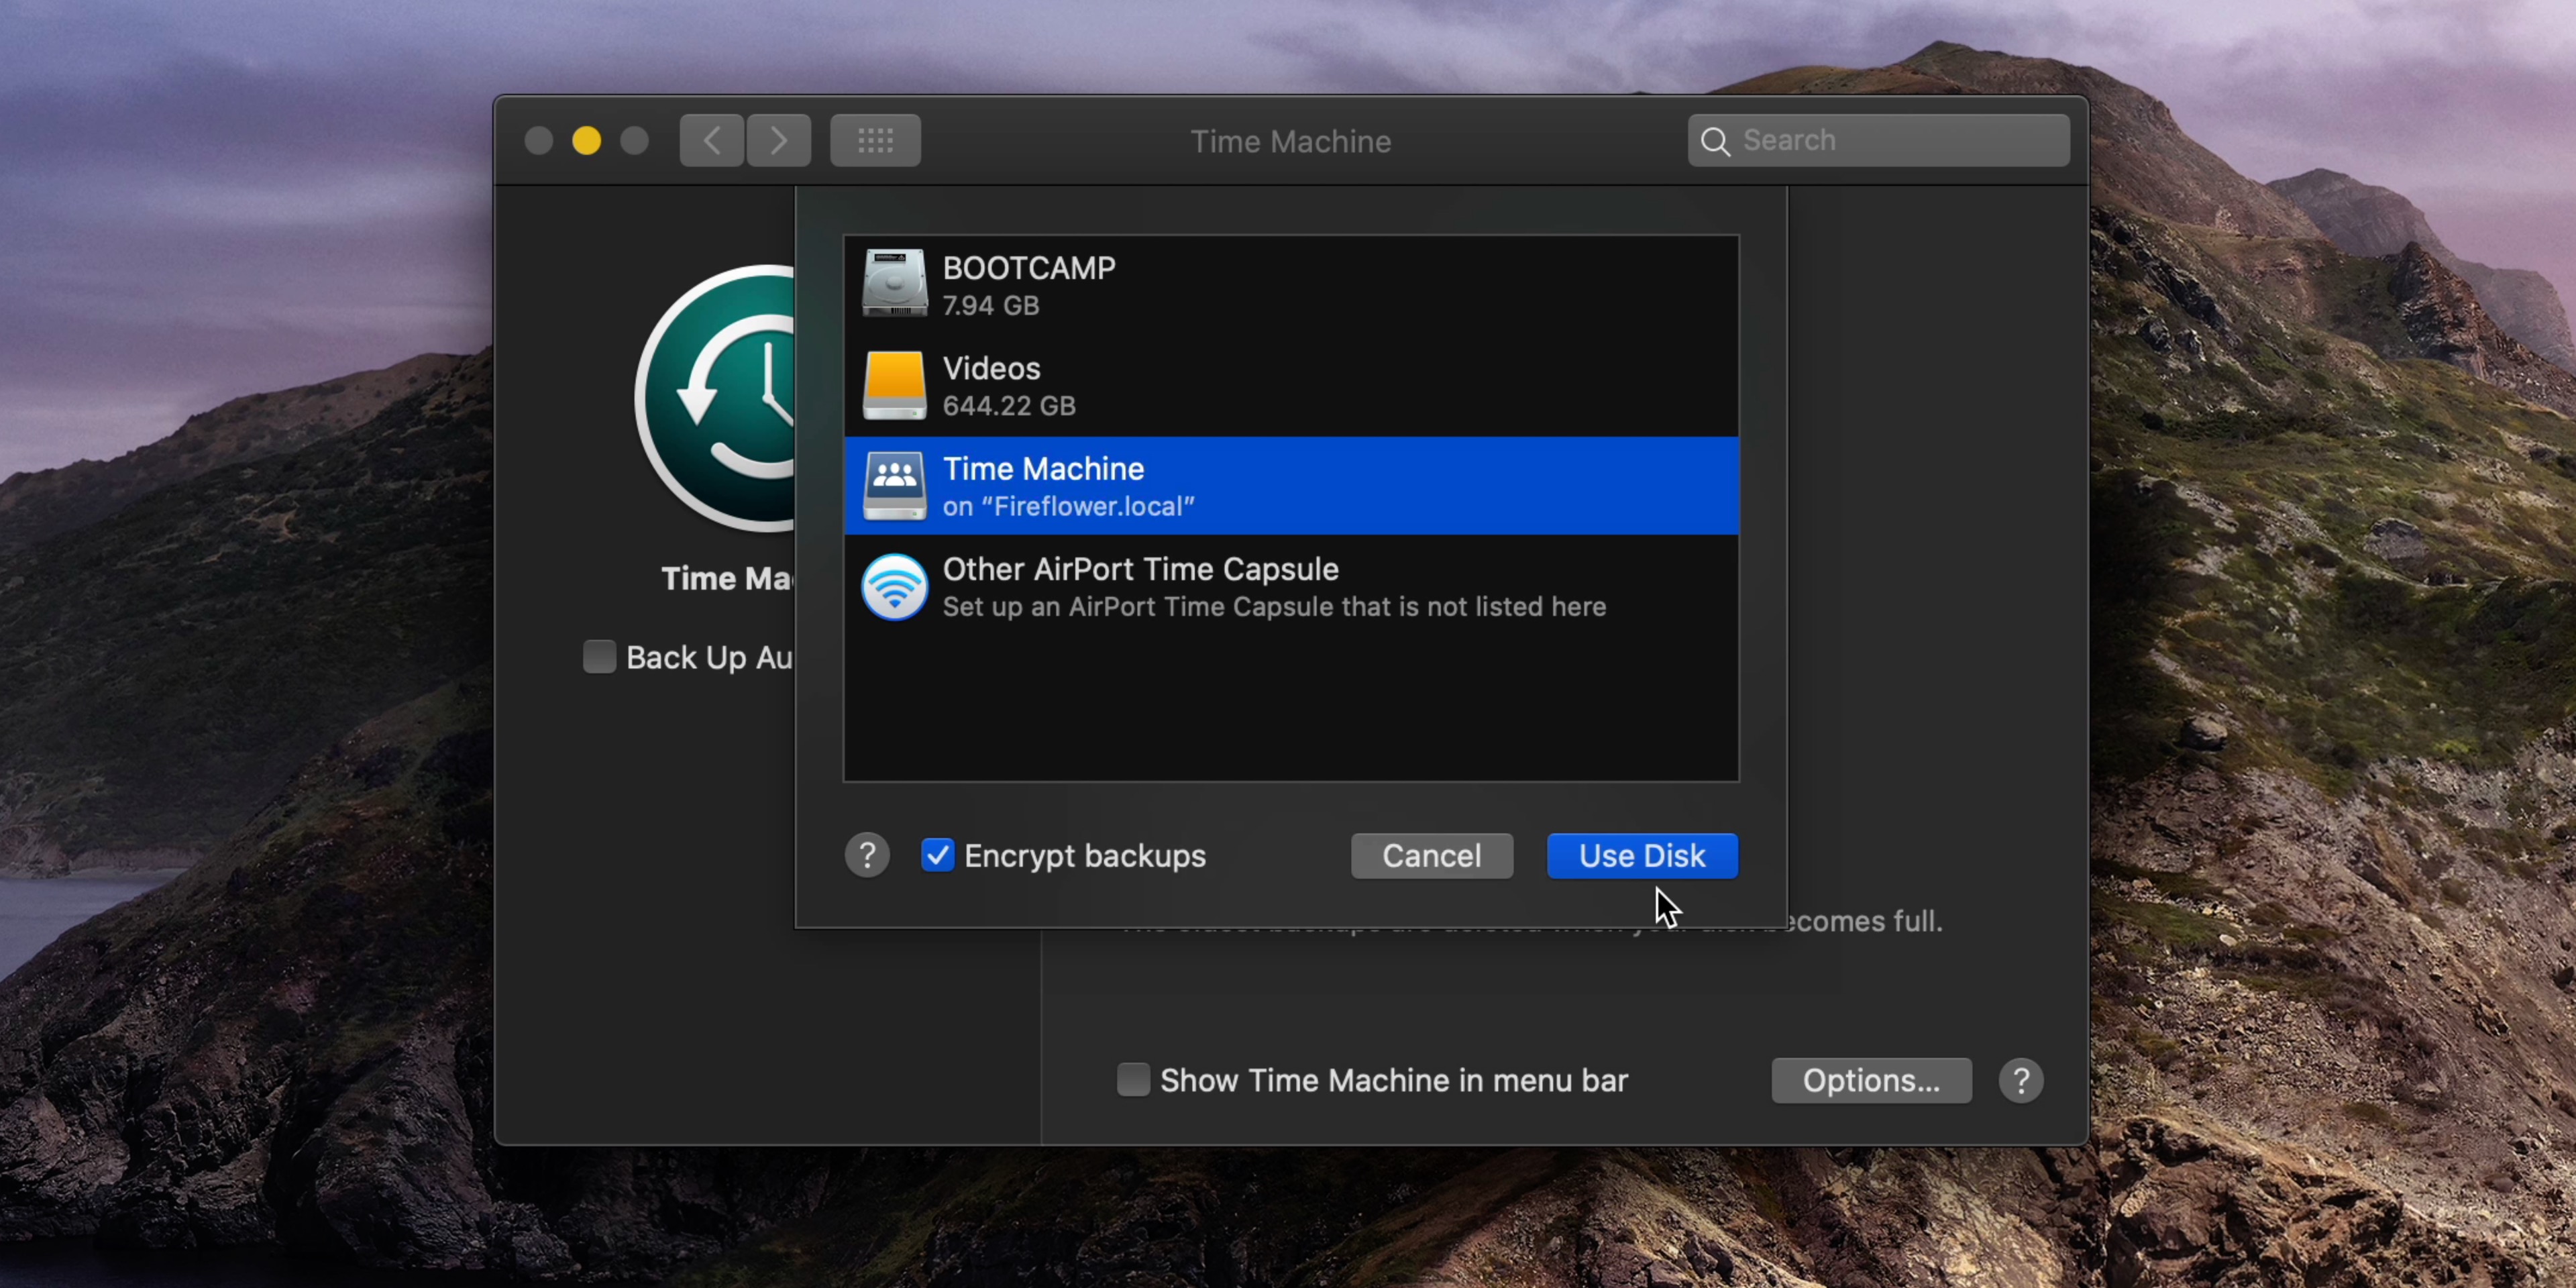 cant install update mac because disk is used for time machine backups